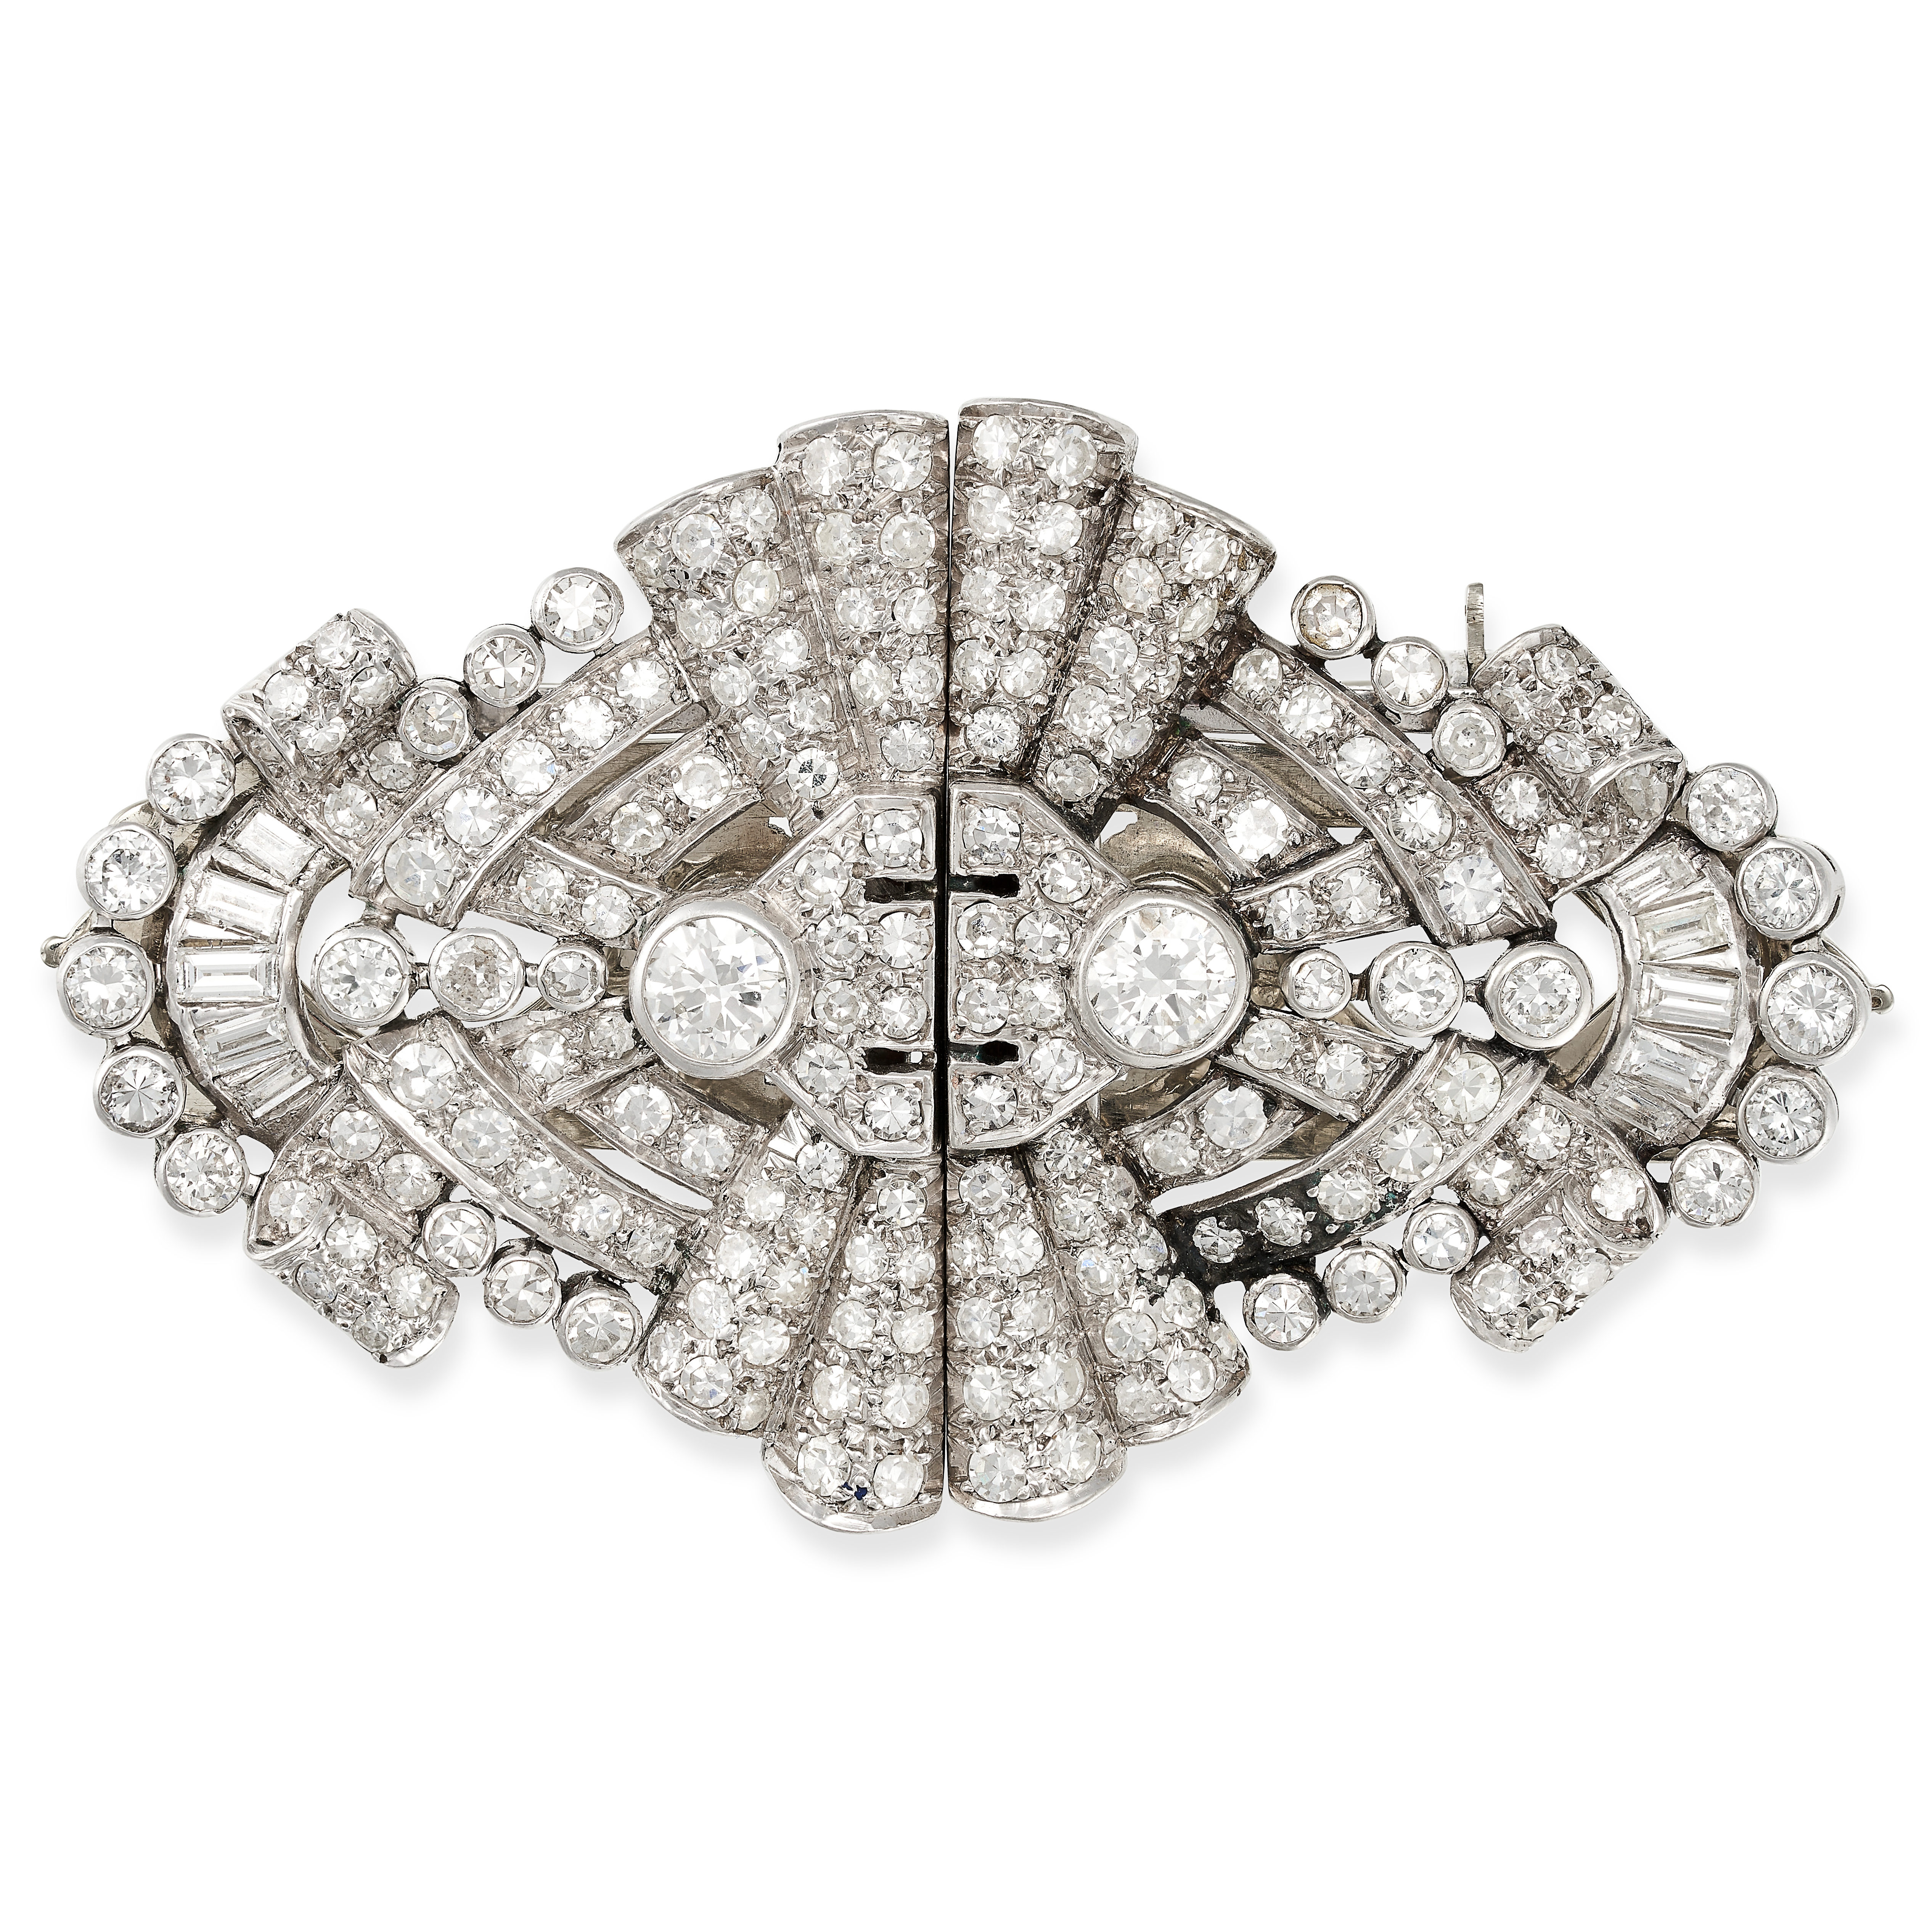 AN ANTIQUE ART DECO DIAMOND DOUBLE CLIP BROOCH in scrolling geometric design, set throughout with - Image 4 of 5